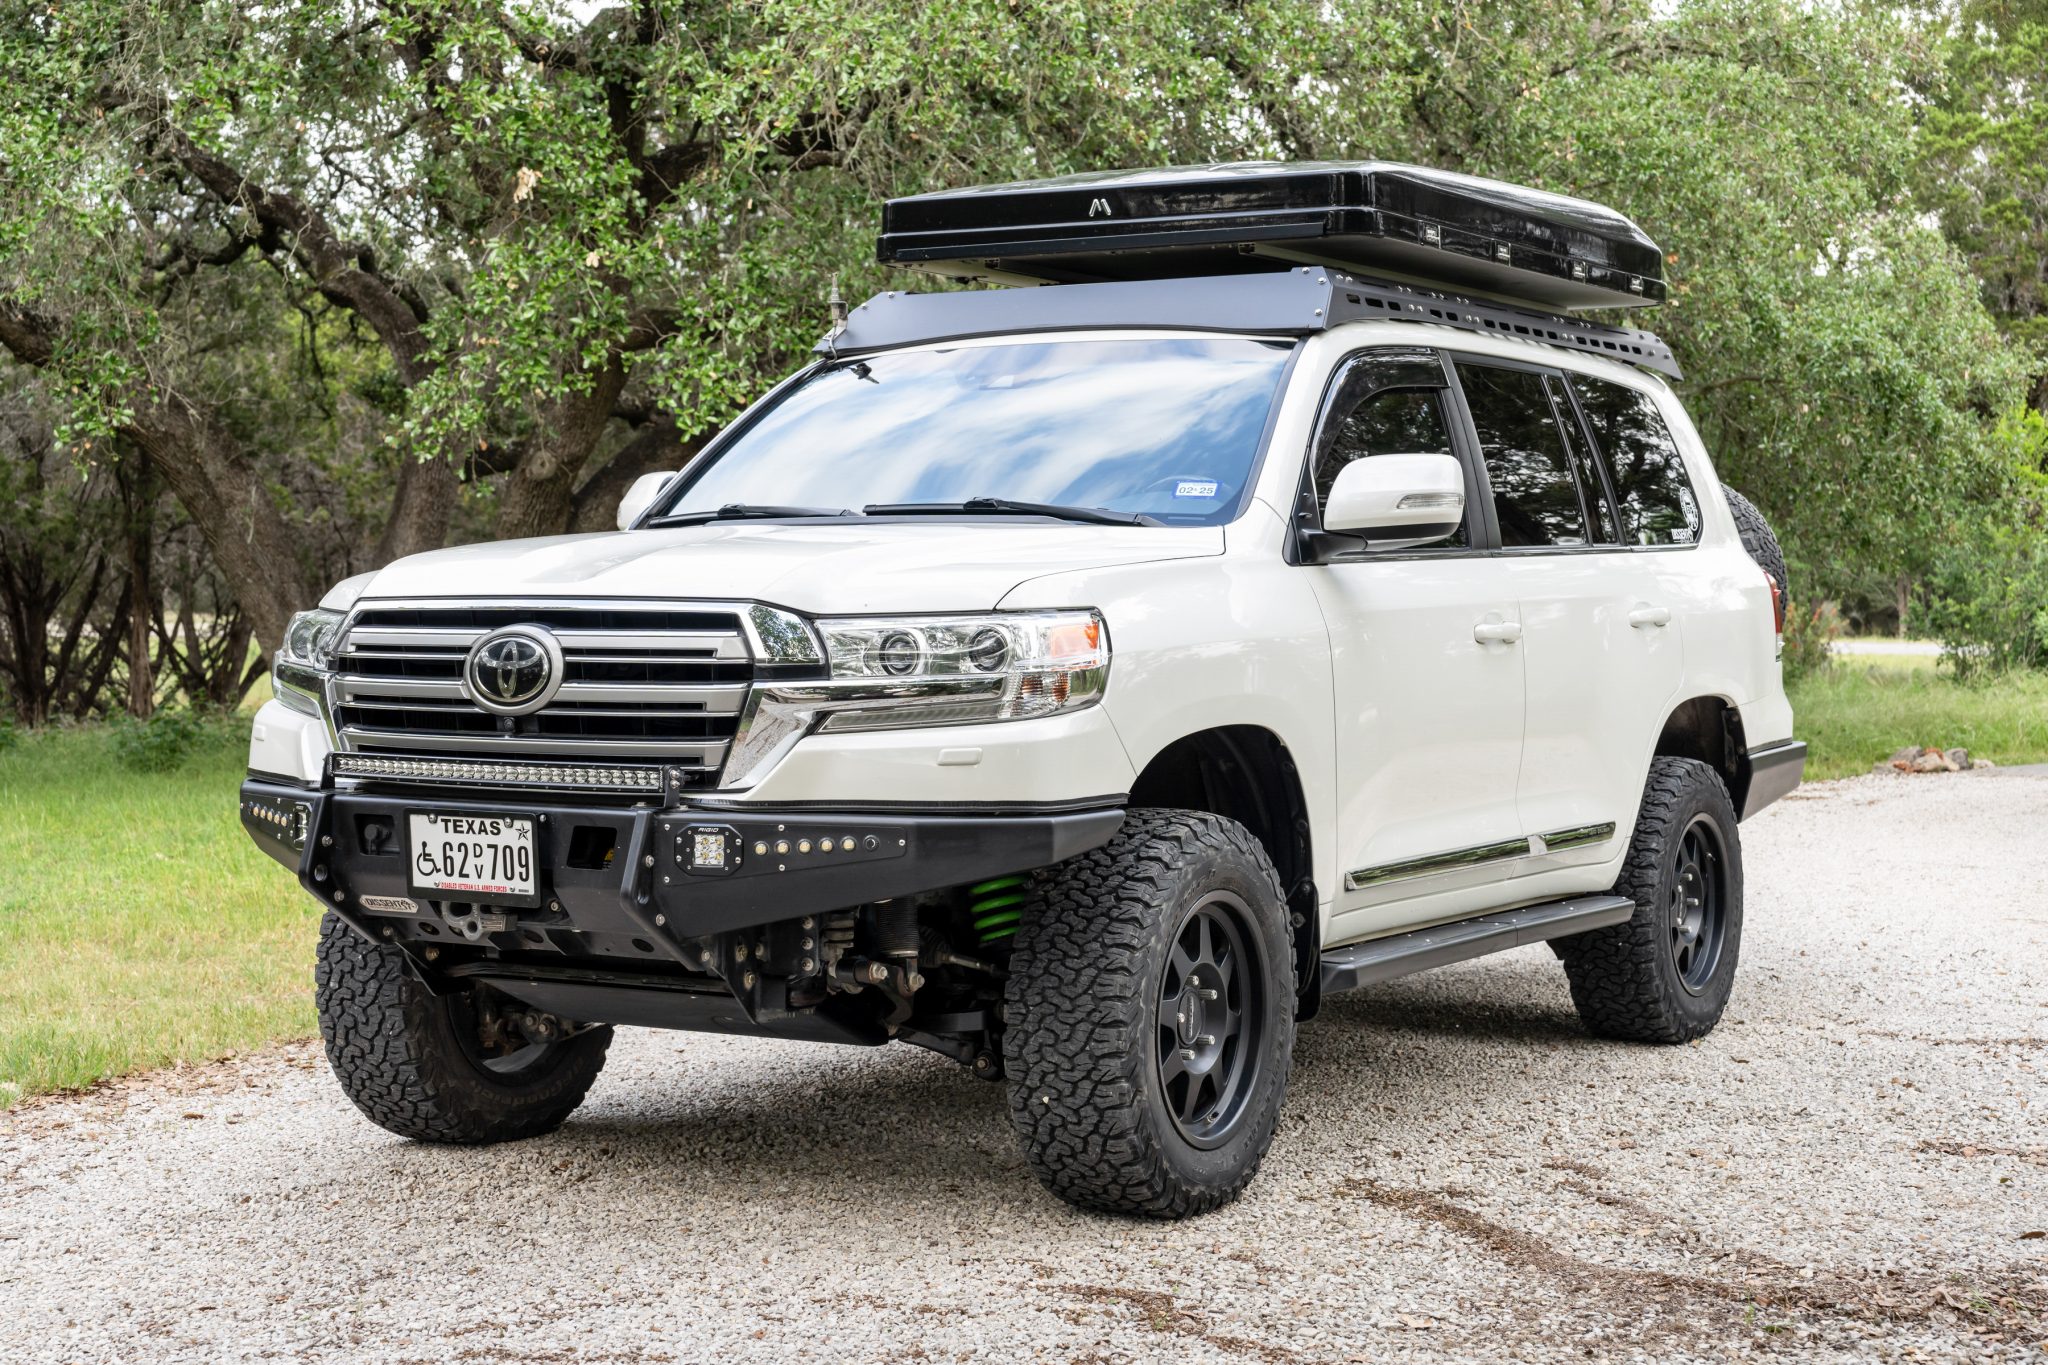 Used Modified 2016 Toyota Land Cruiser URJ200 Review